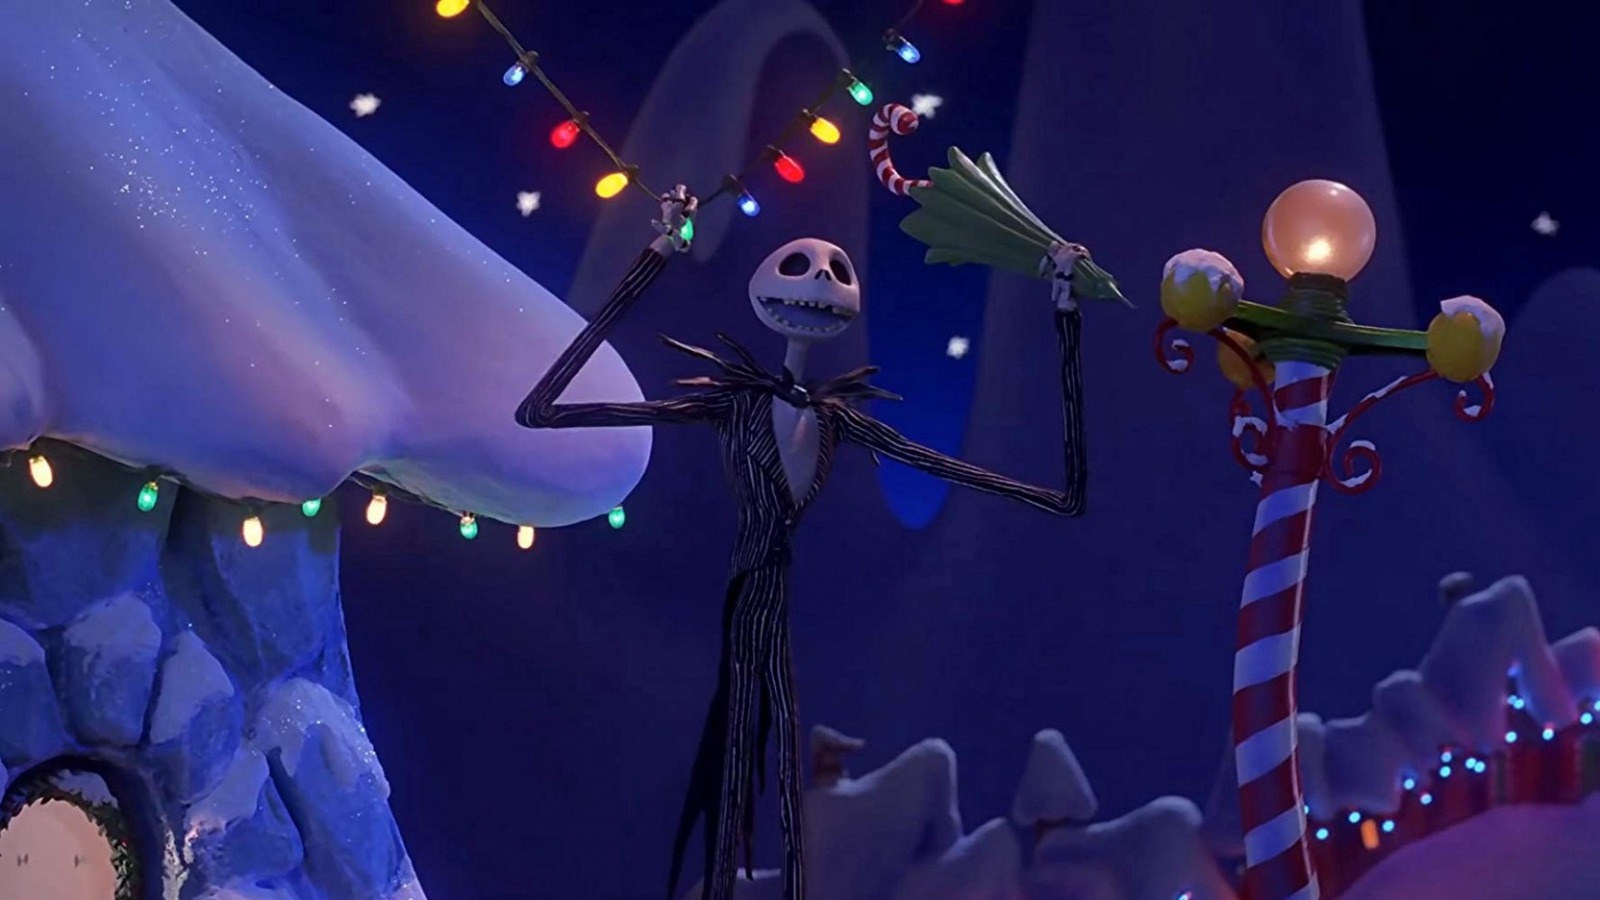 20 Creepy Facts About Jack Skellington - The Fact Site